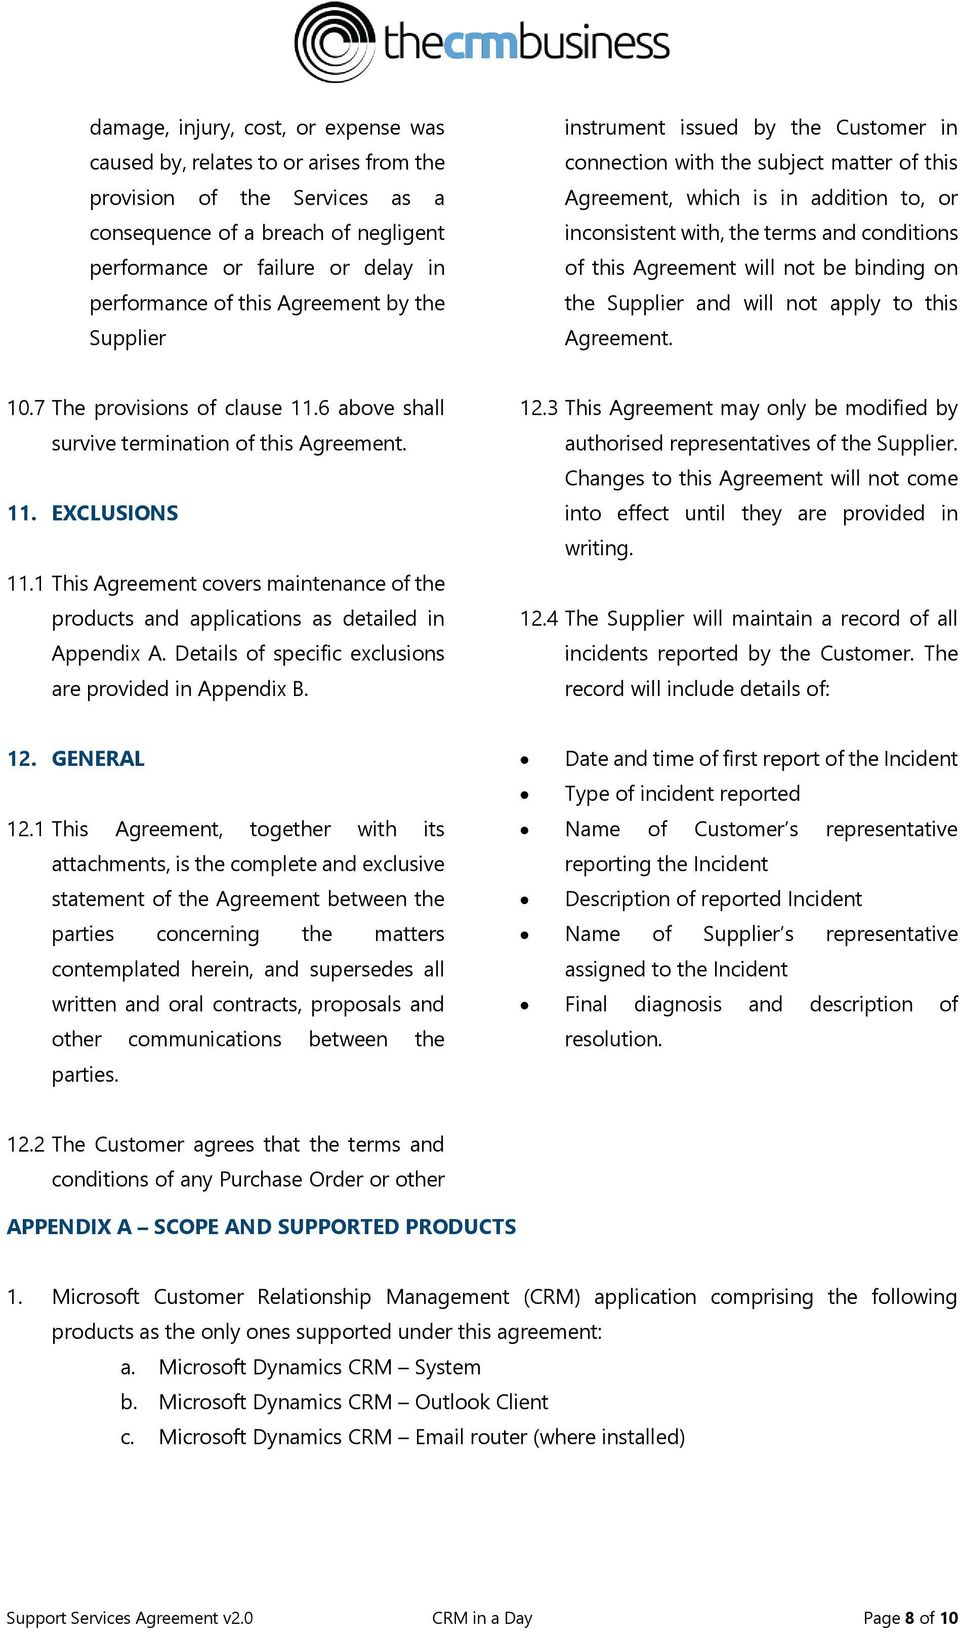 this Agreement will not be binding on the Supplier and will not apply to this Agreement. 10.7 The provisions of clause 11.6 above shall survive termination of this Agreement. 11. EXCLUSIONS 11.